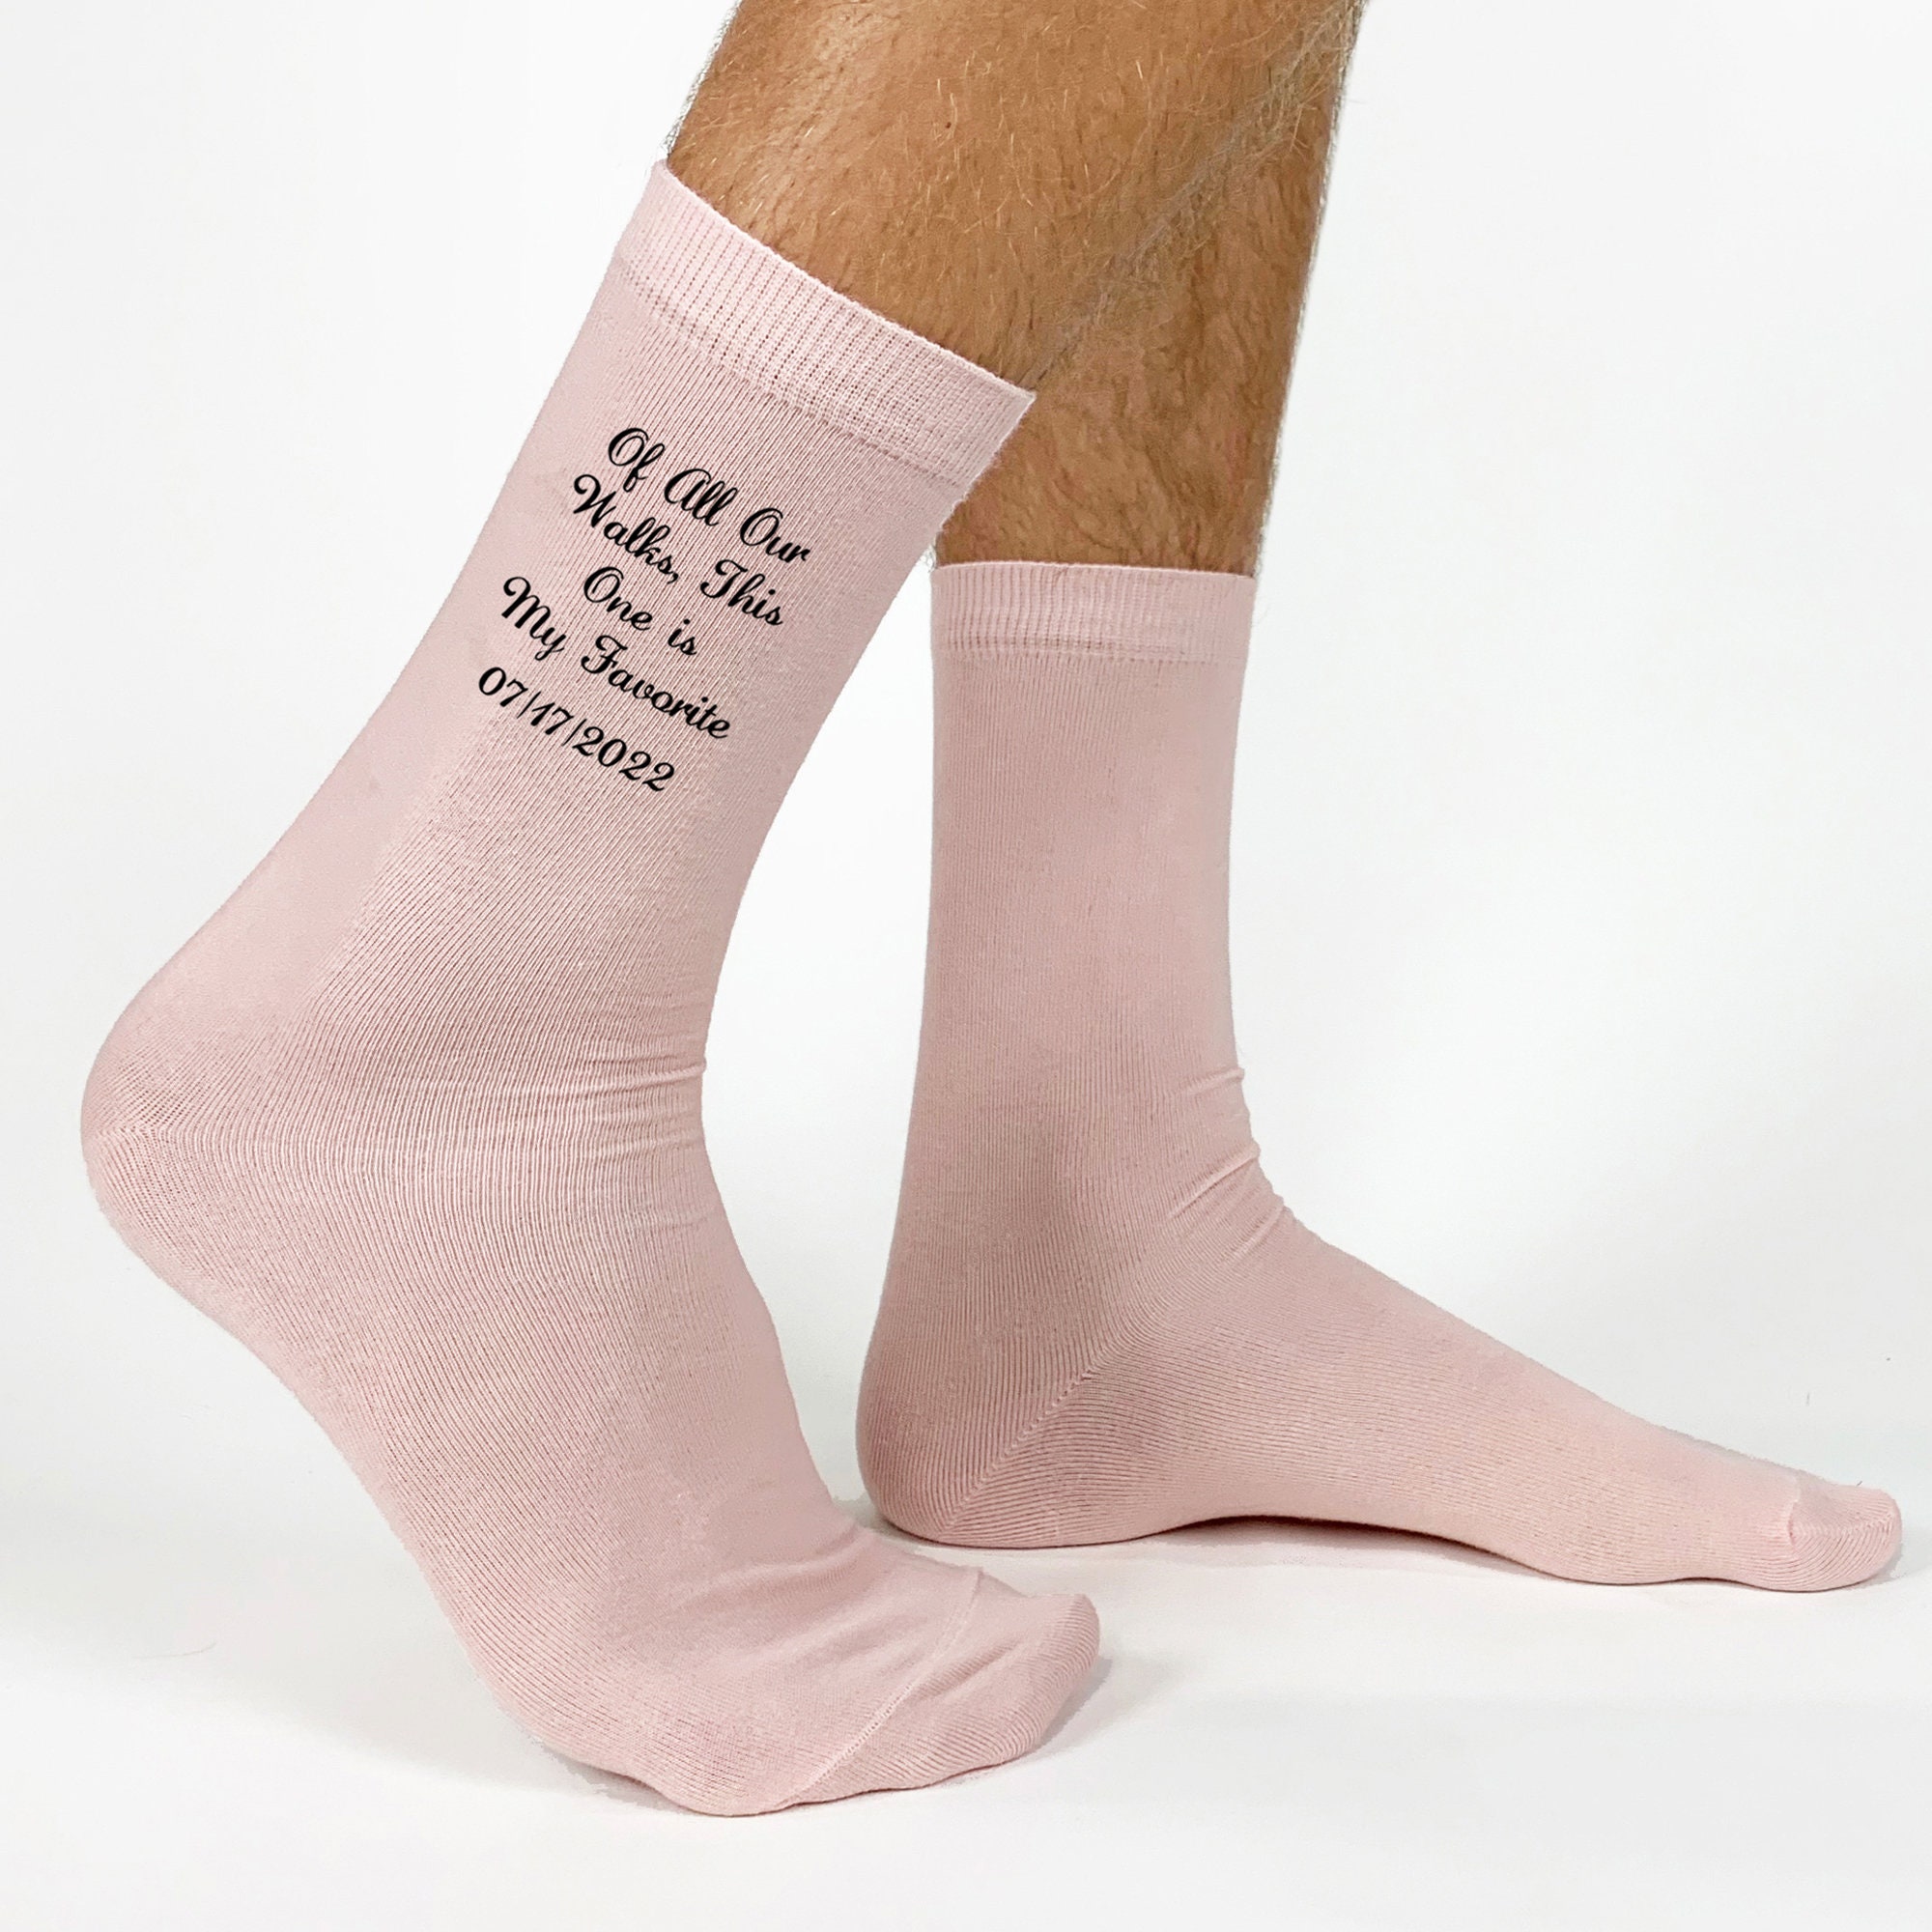 Kleding Gender-neutrale kleding volwassenen Sokken & Beenmode of all our walks this is my fav Father of the Bride Gift special socks for a special walk father personalized socks brides father gift 